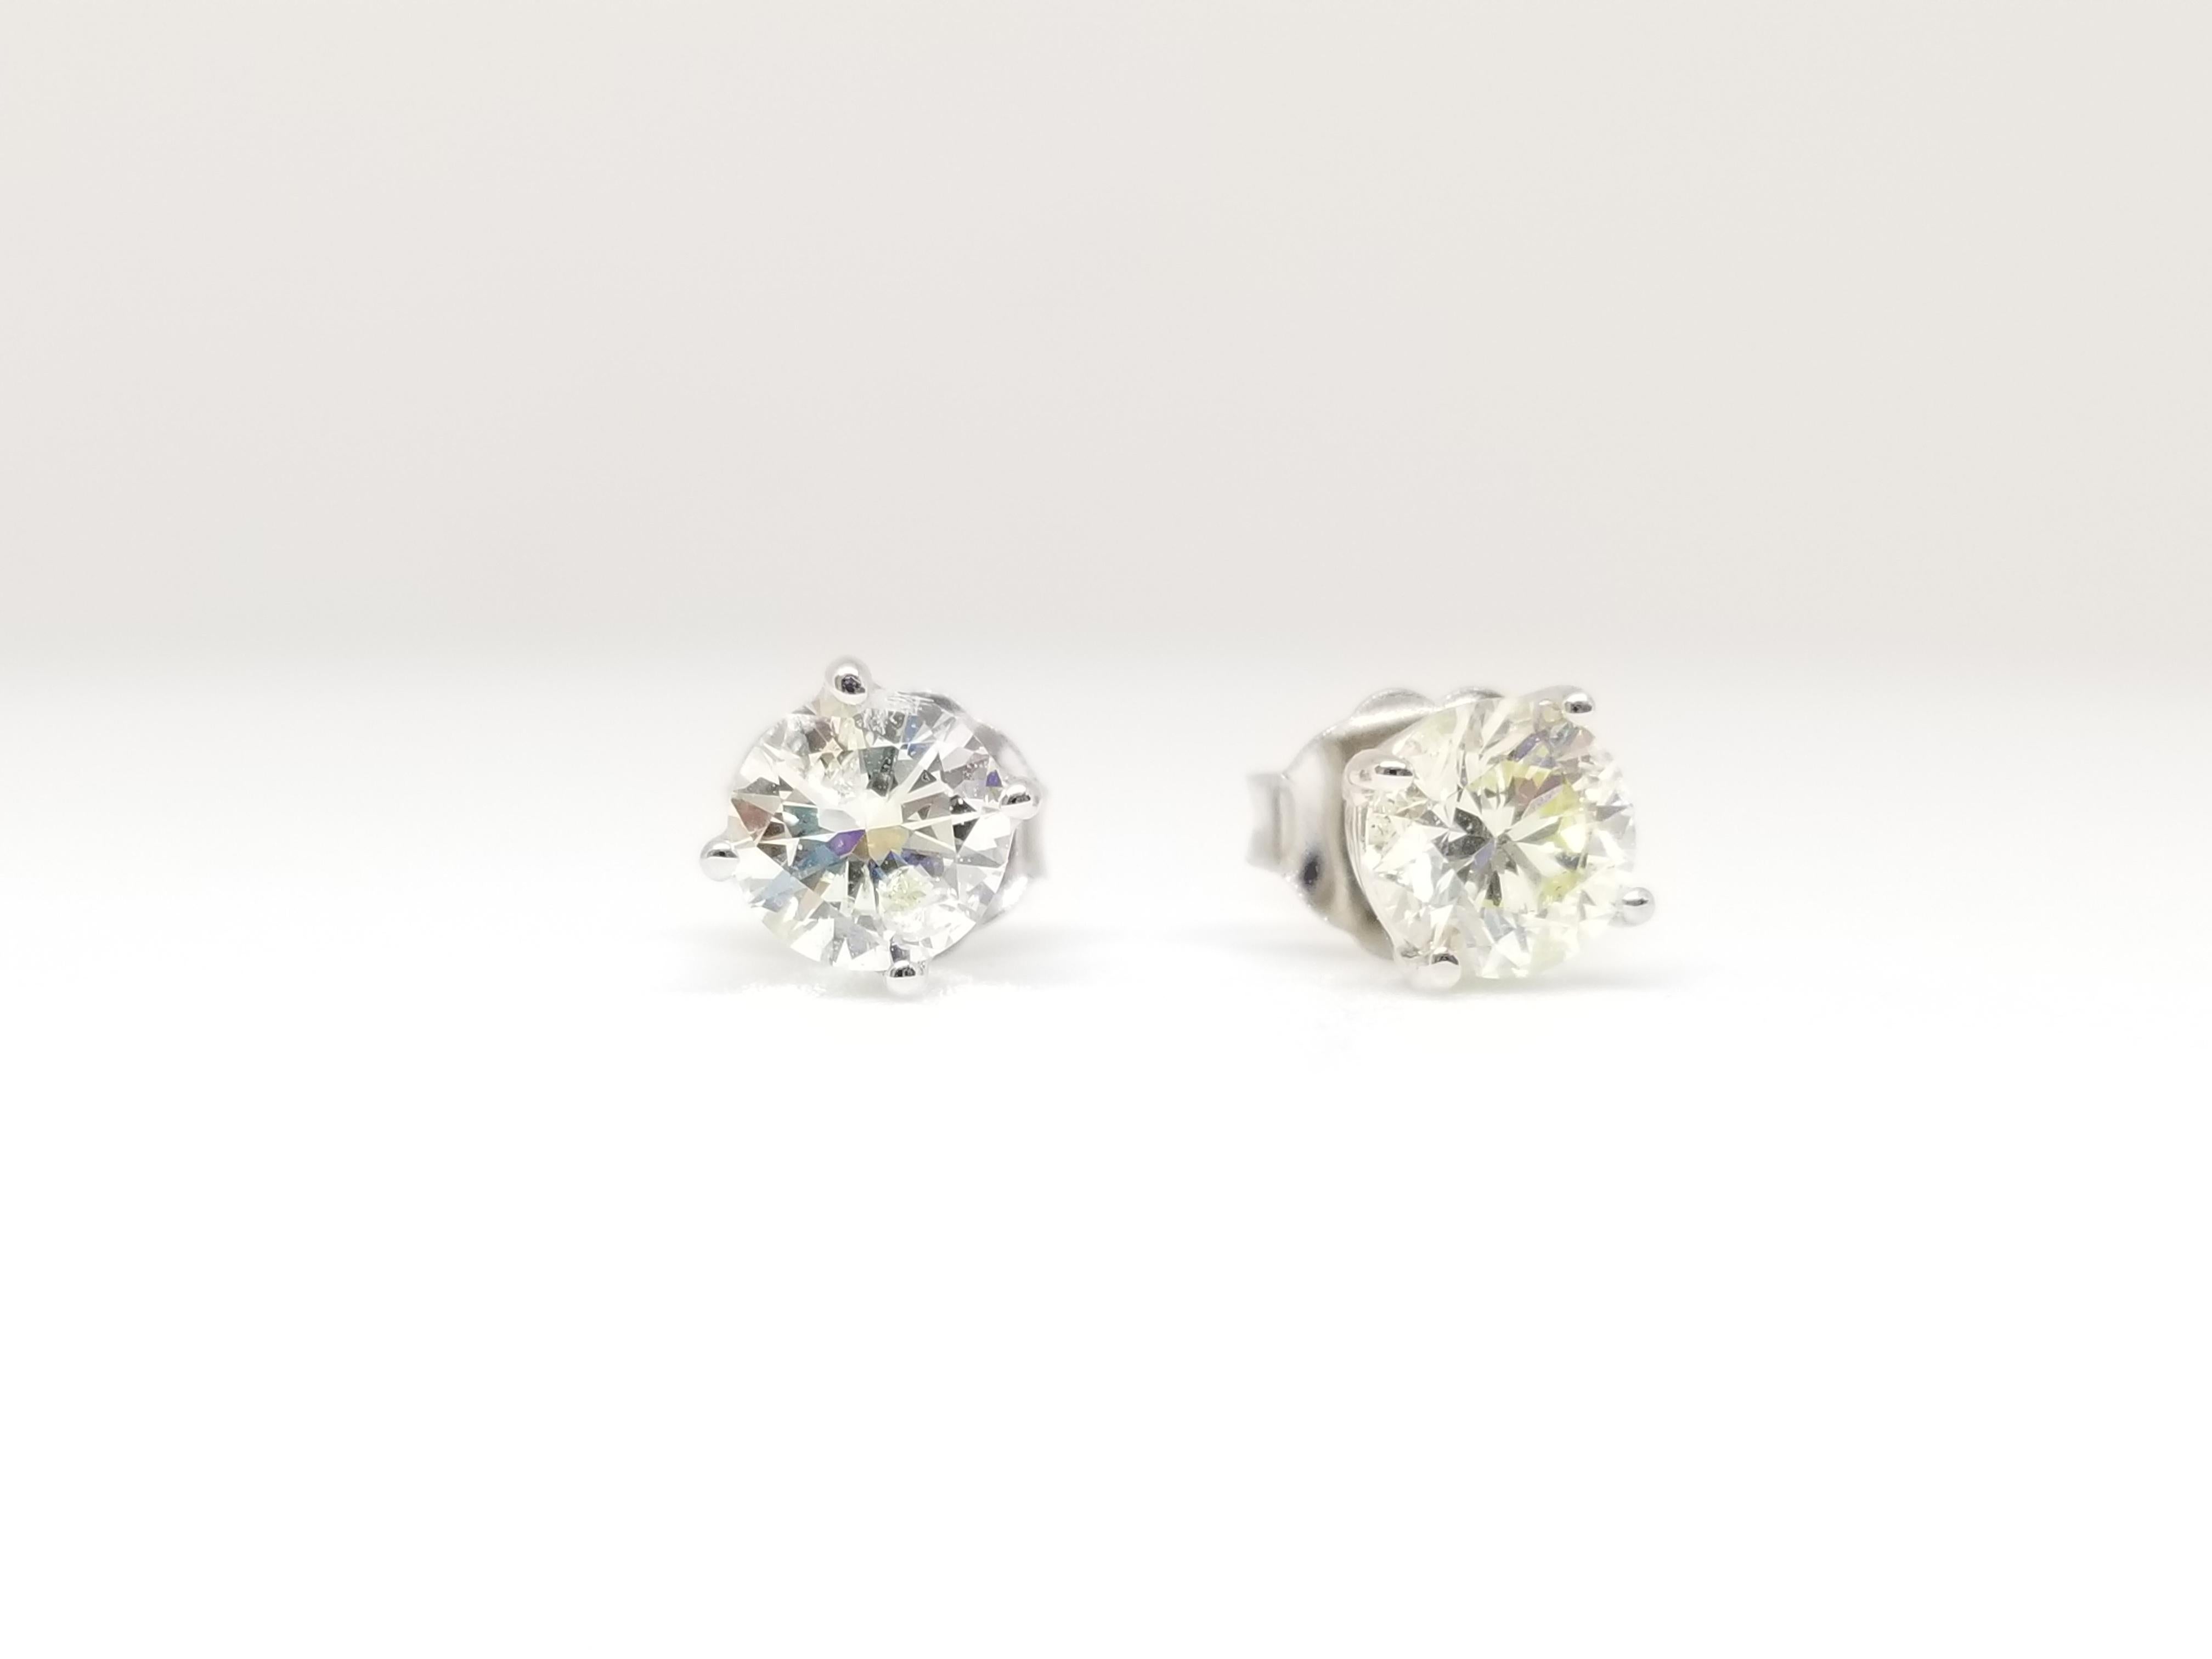 Natural Round Diamond Studs set in 4 prong push back 14k white gold 0.98 carats total weight. Color I-J, Clarity SI.
